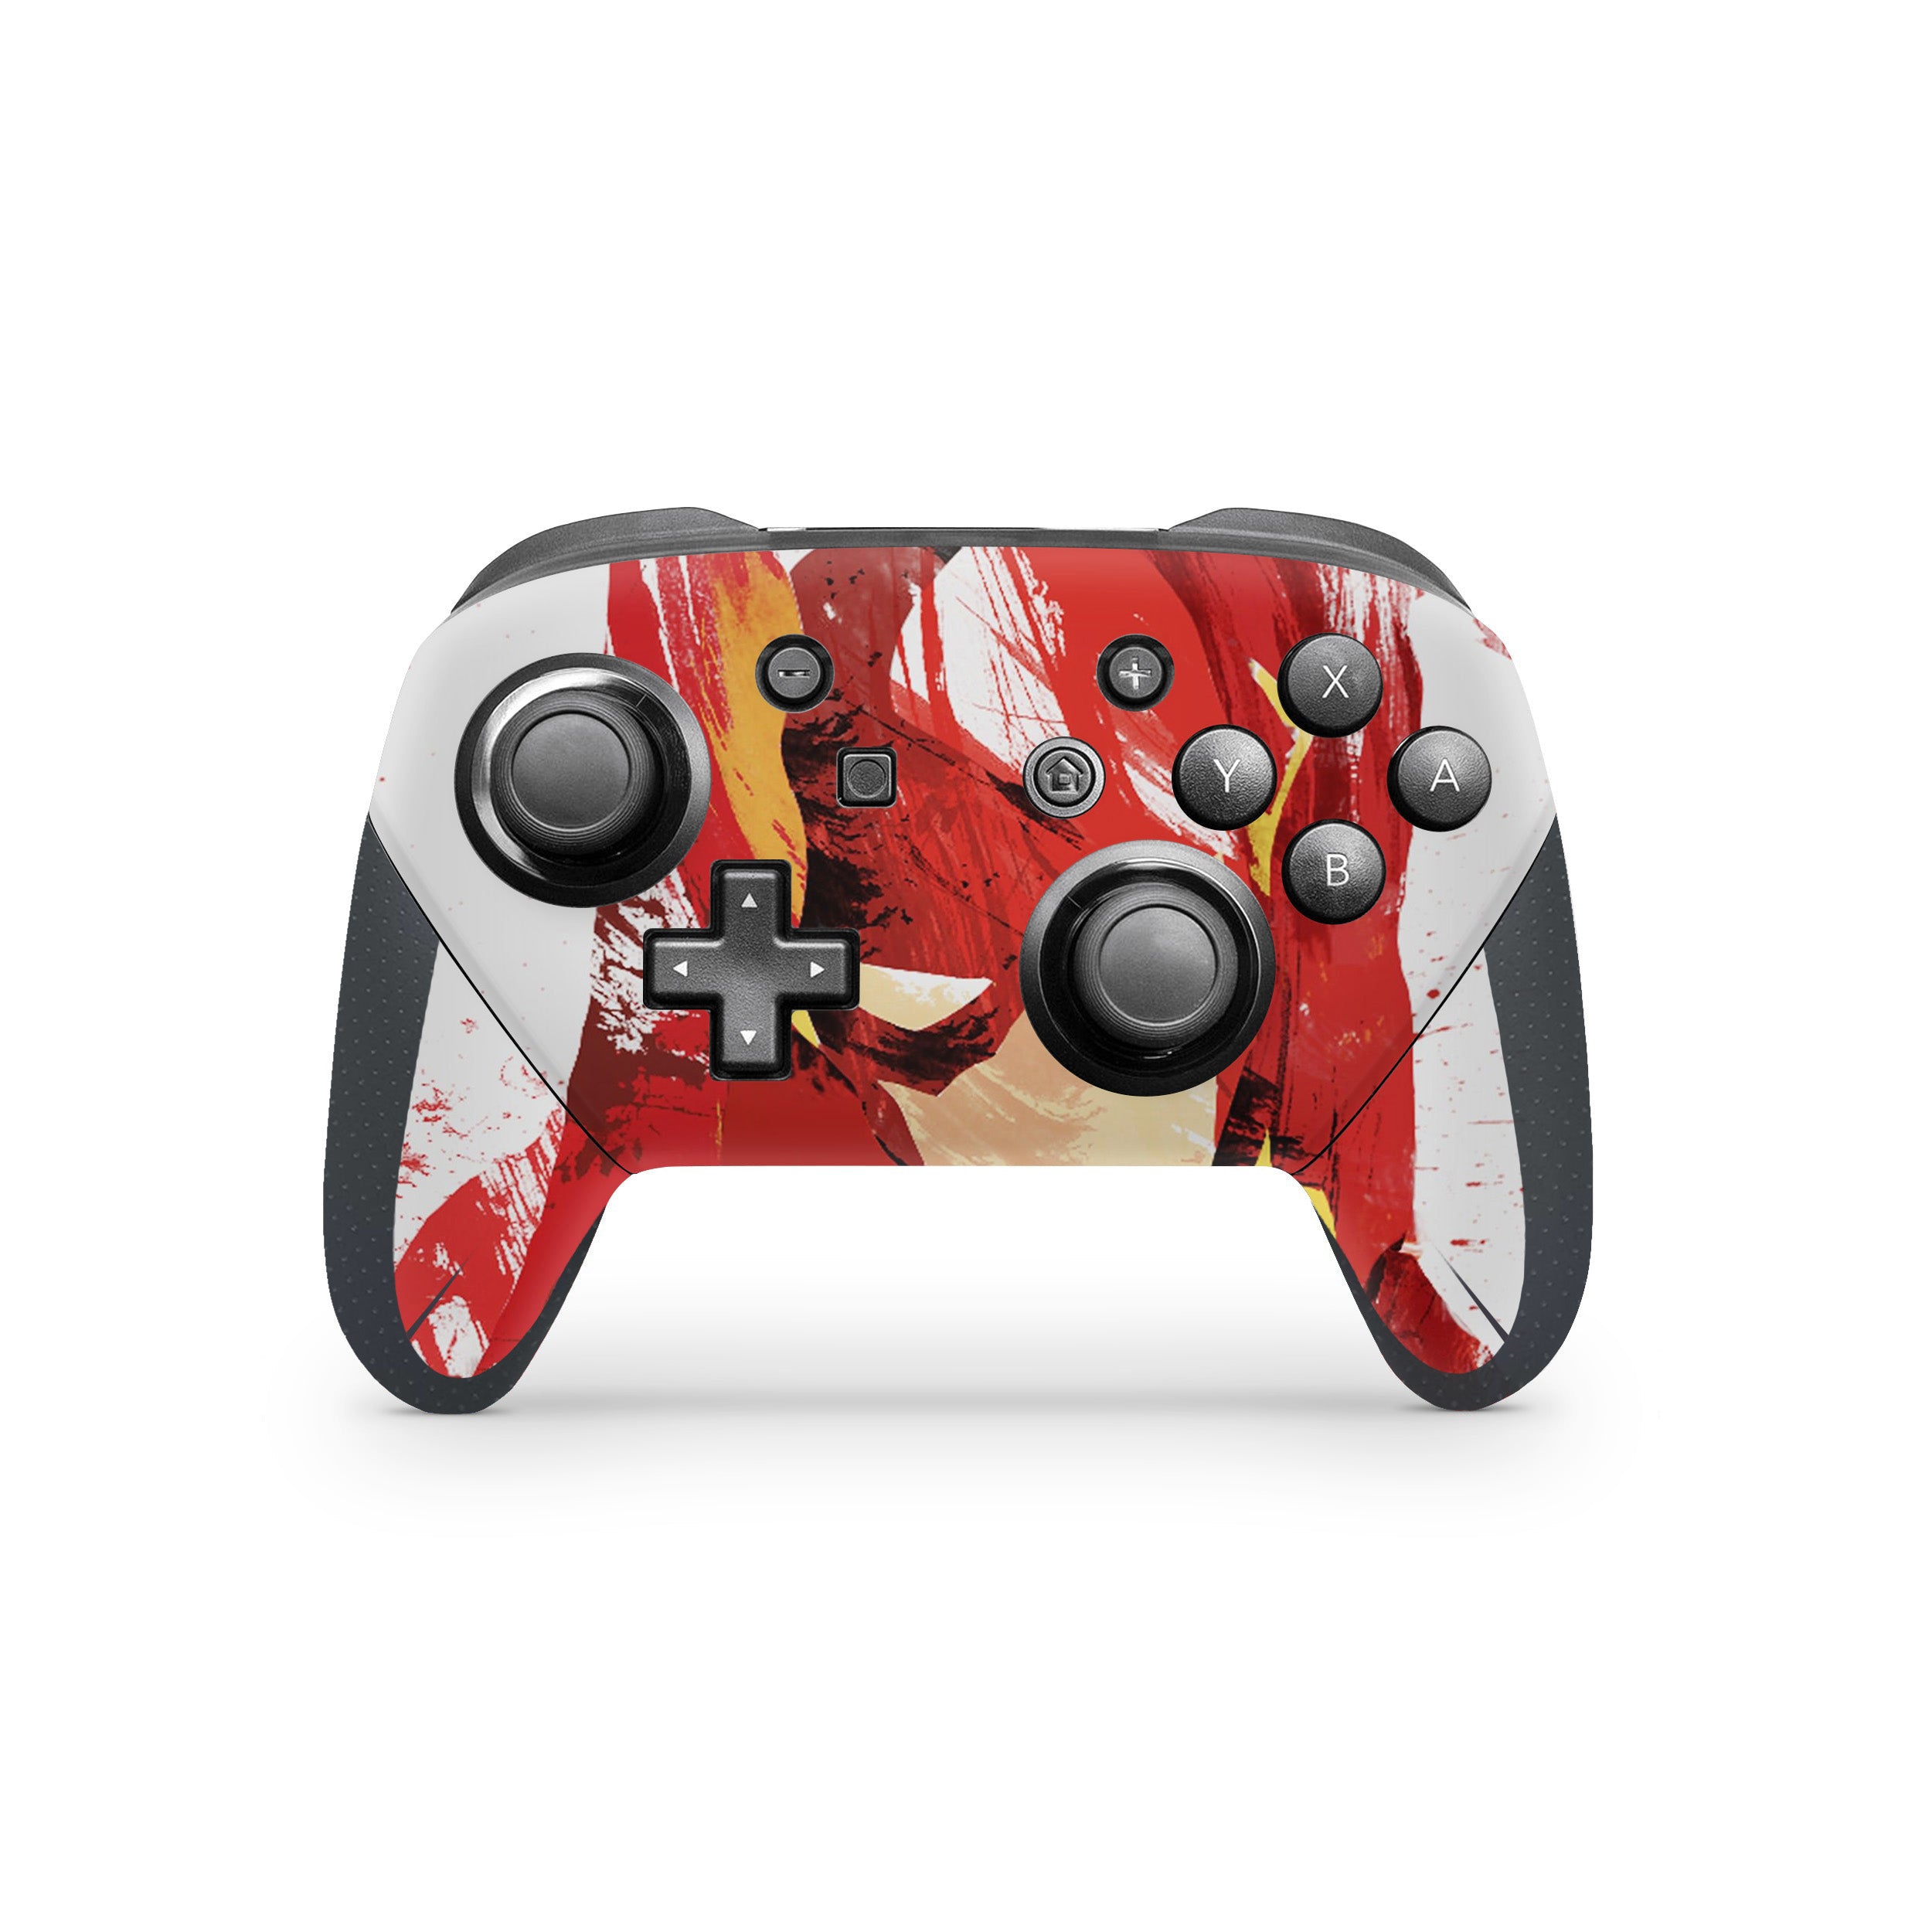 A video game skin featuring a Marvel Flash design for the Switch Pro Controller.